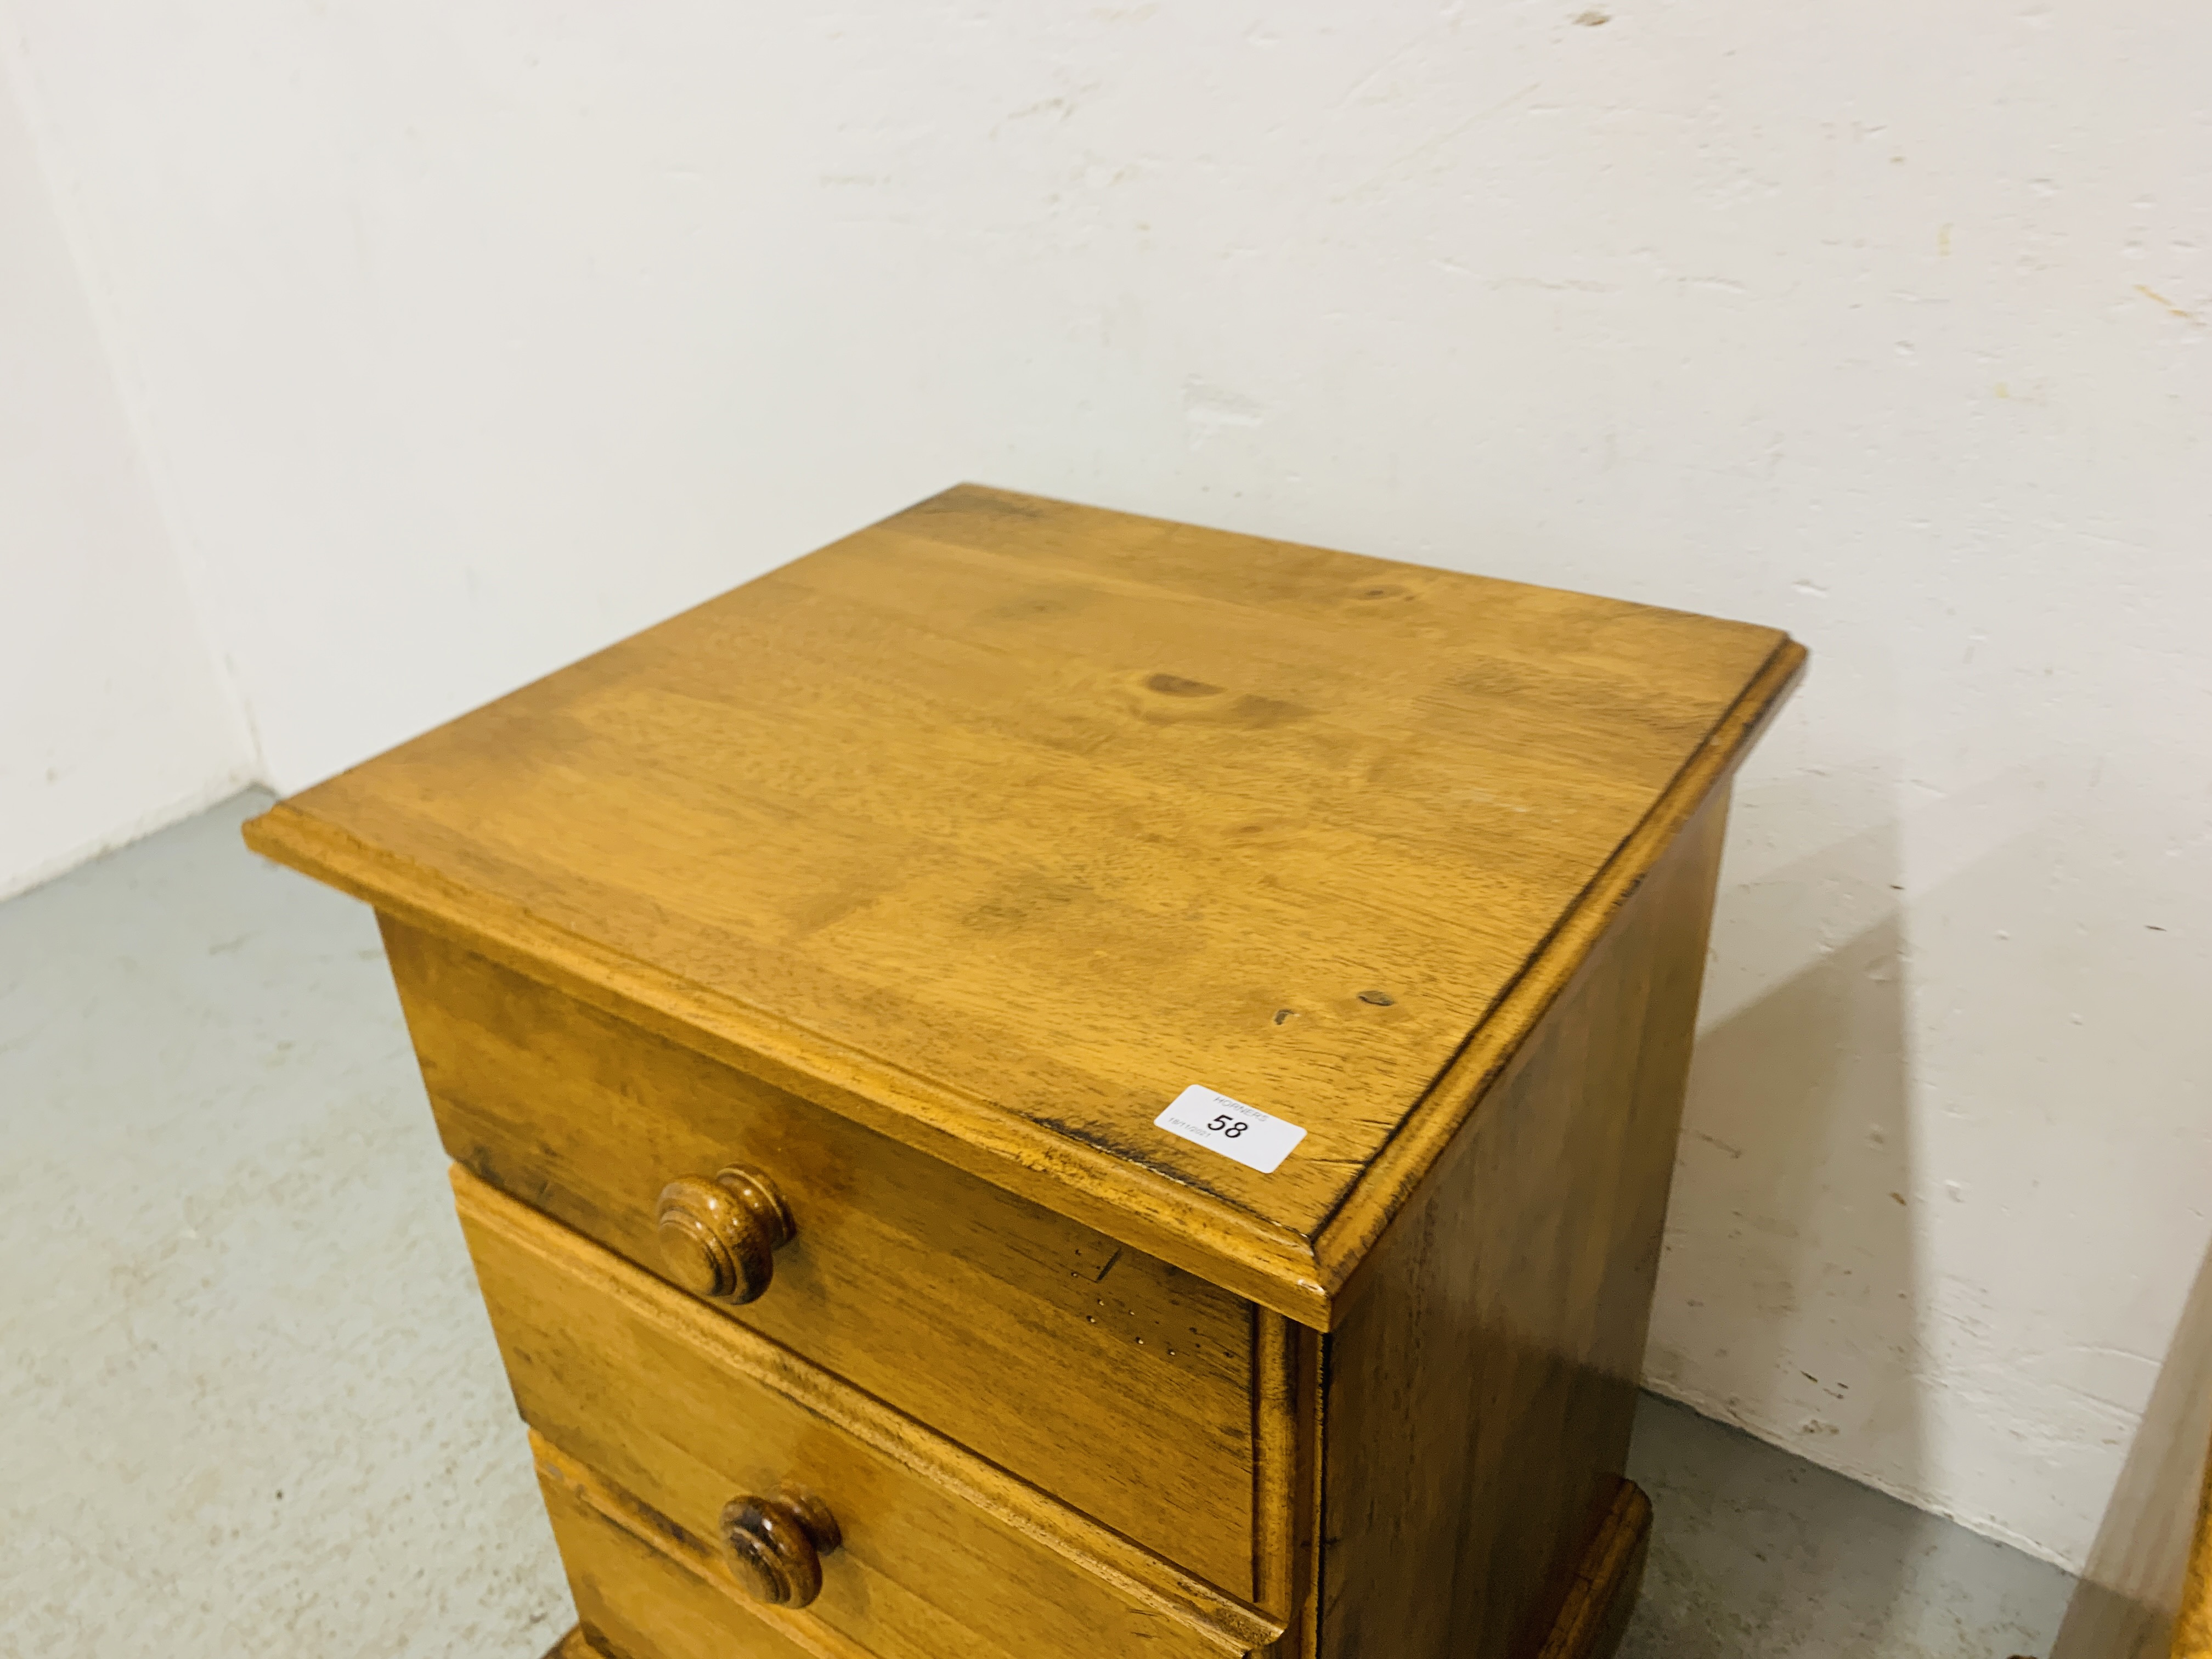 PAIR OF MODERN HARDWOOD 3 DRAWER BEDSIDE CHESTS, WITH TURNED HANDLES - W 49CM. D 46CM. H 63CM. - Image 3 of 6